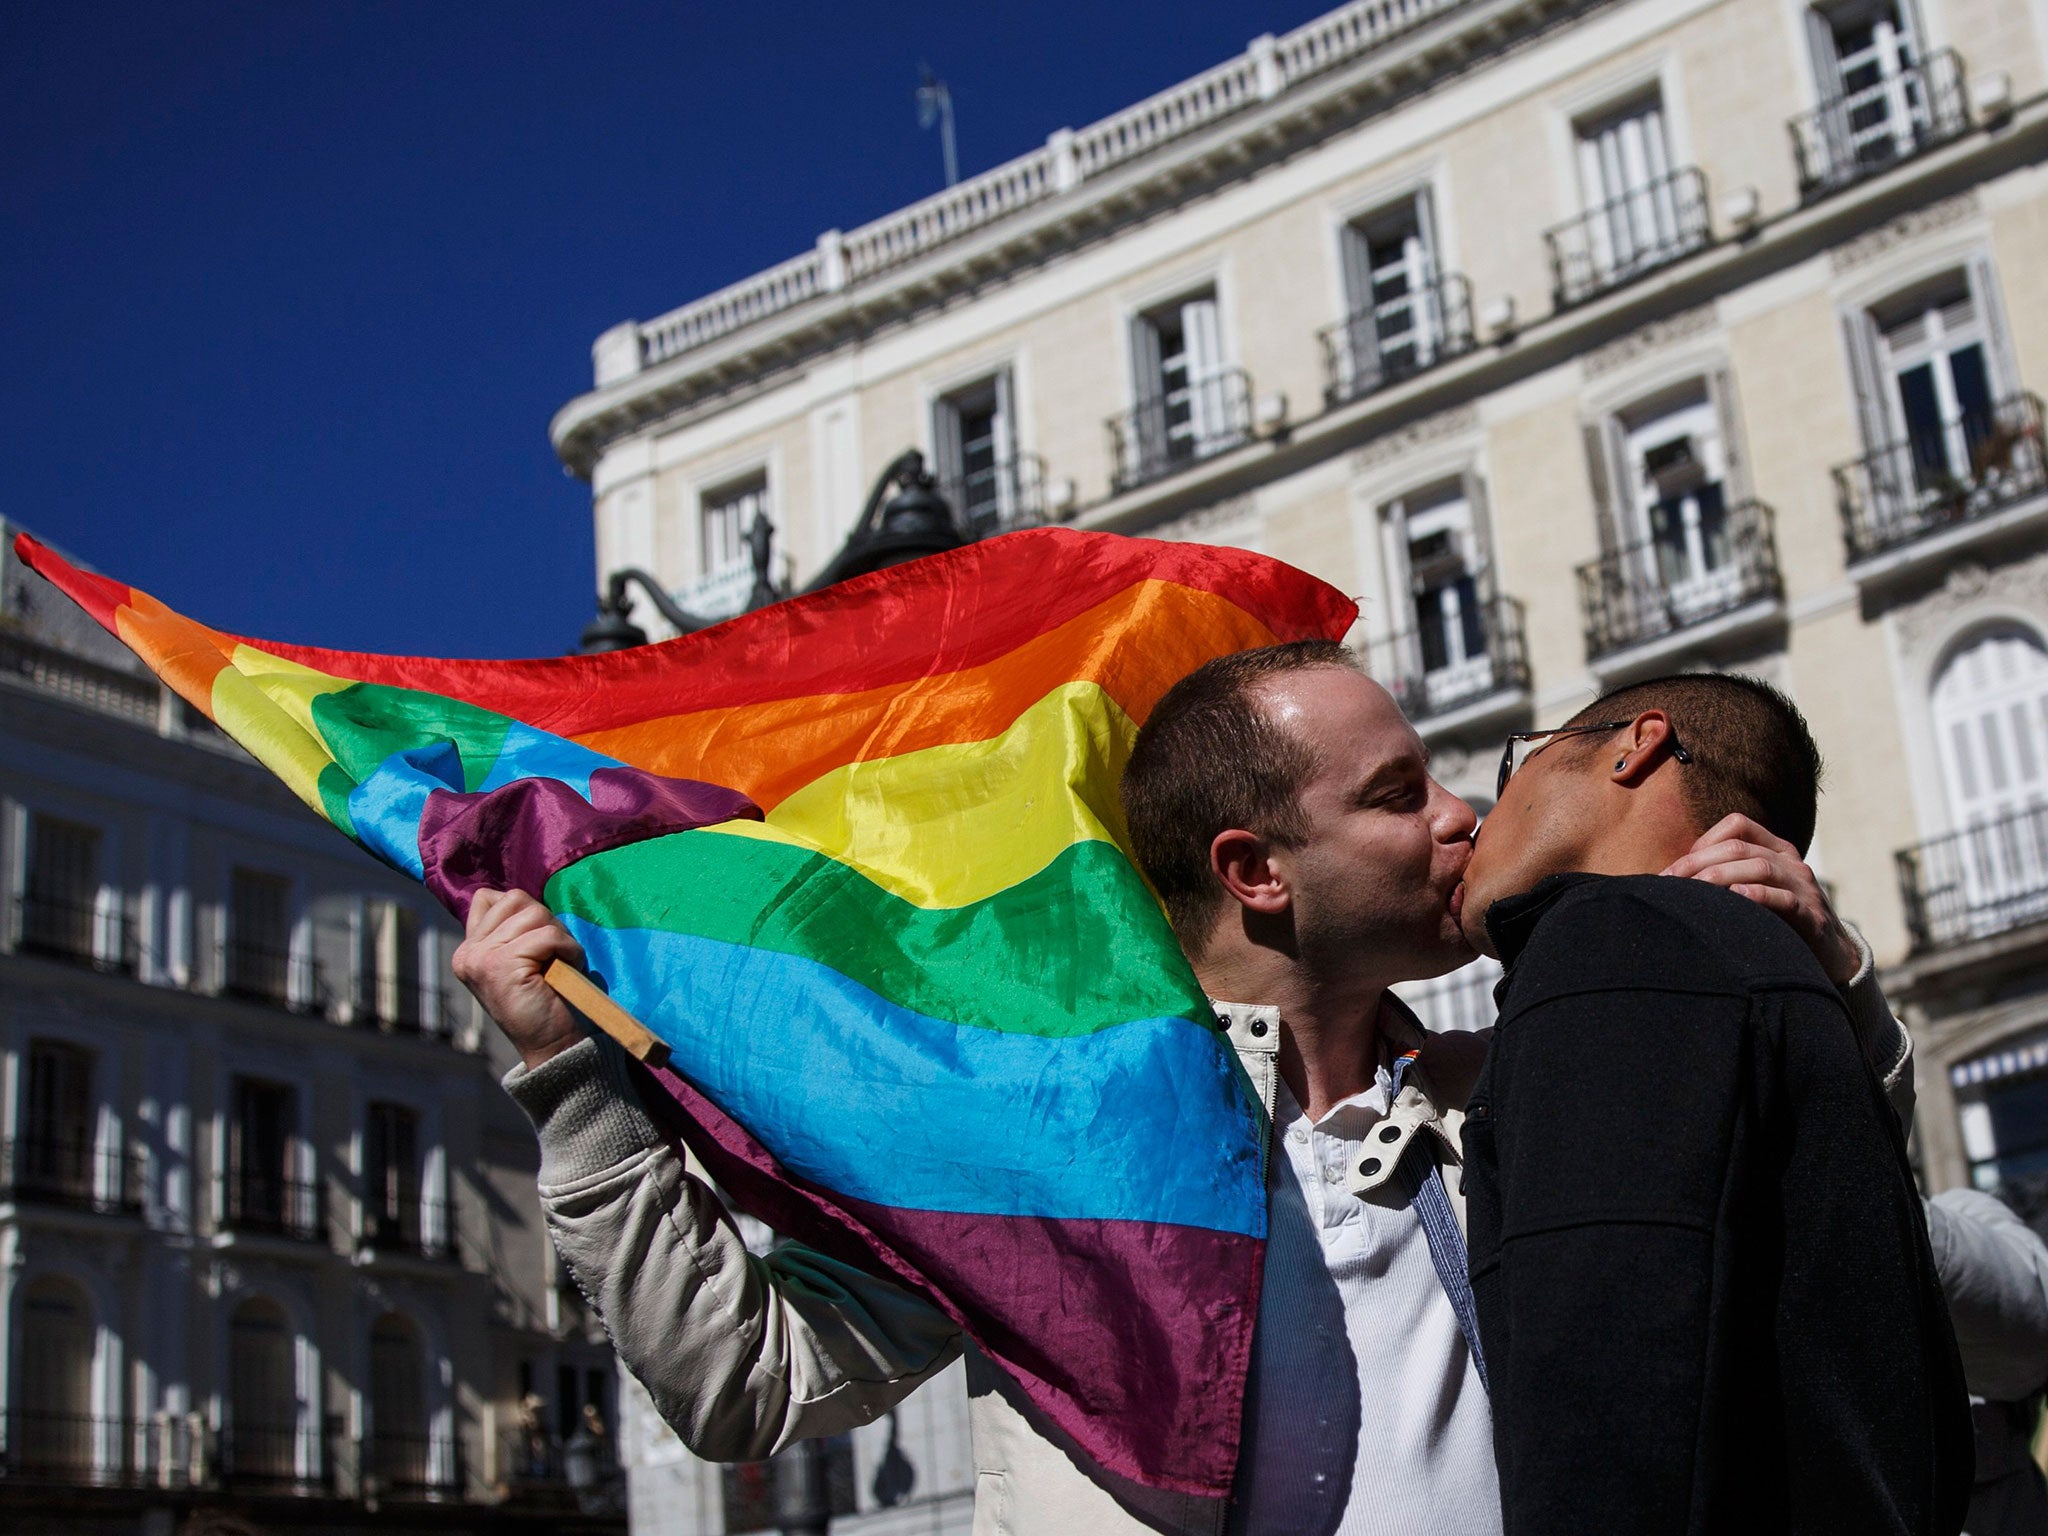 Men stage a kiss protest in front of a central metro station in Madrid. The protest was aimed against a leaked email which apparently urged metro workers to check the tickets of "musicians, beggars and gays" more often than other travellers, according to